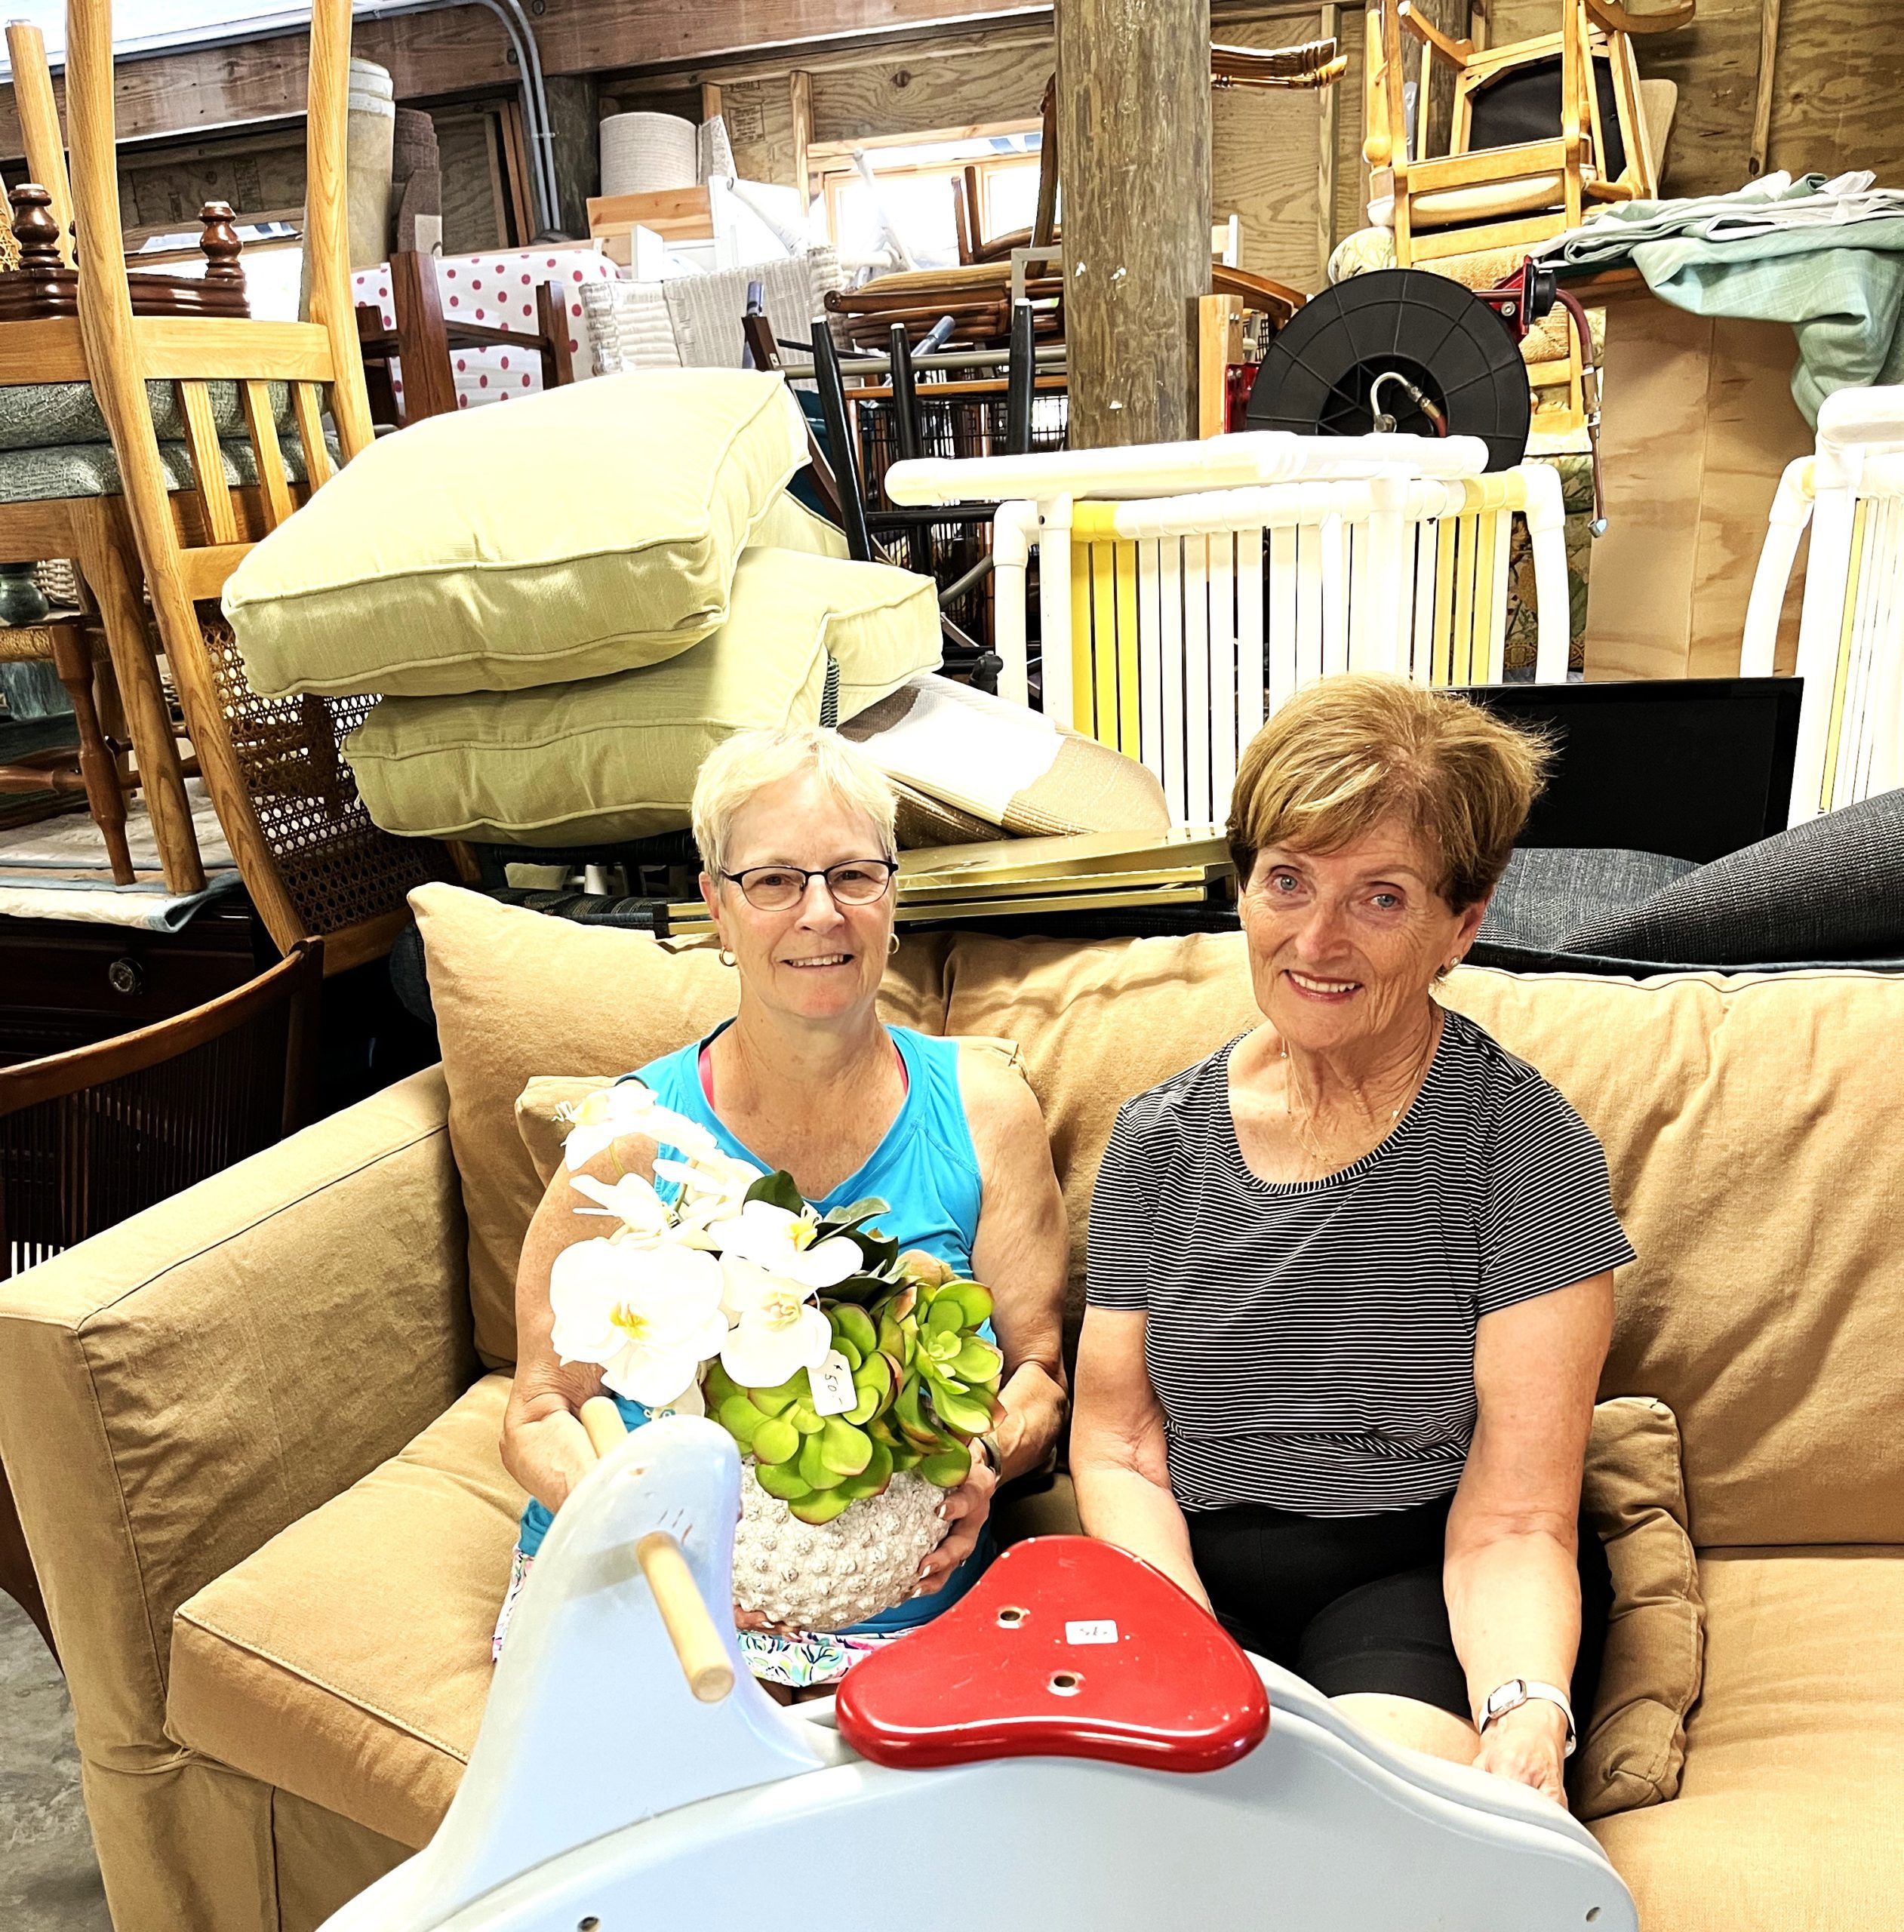 Next up The Strawberry Festival Furniture Sale on March 18 Boca Beacon